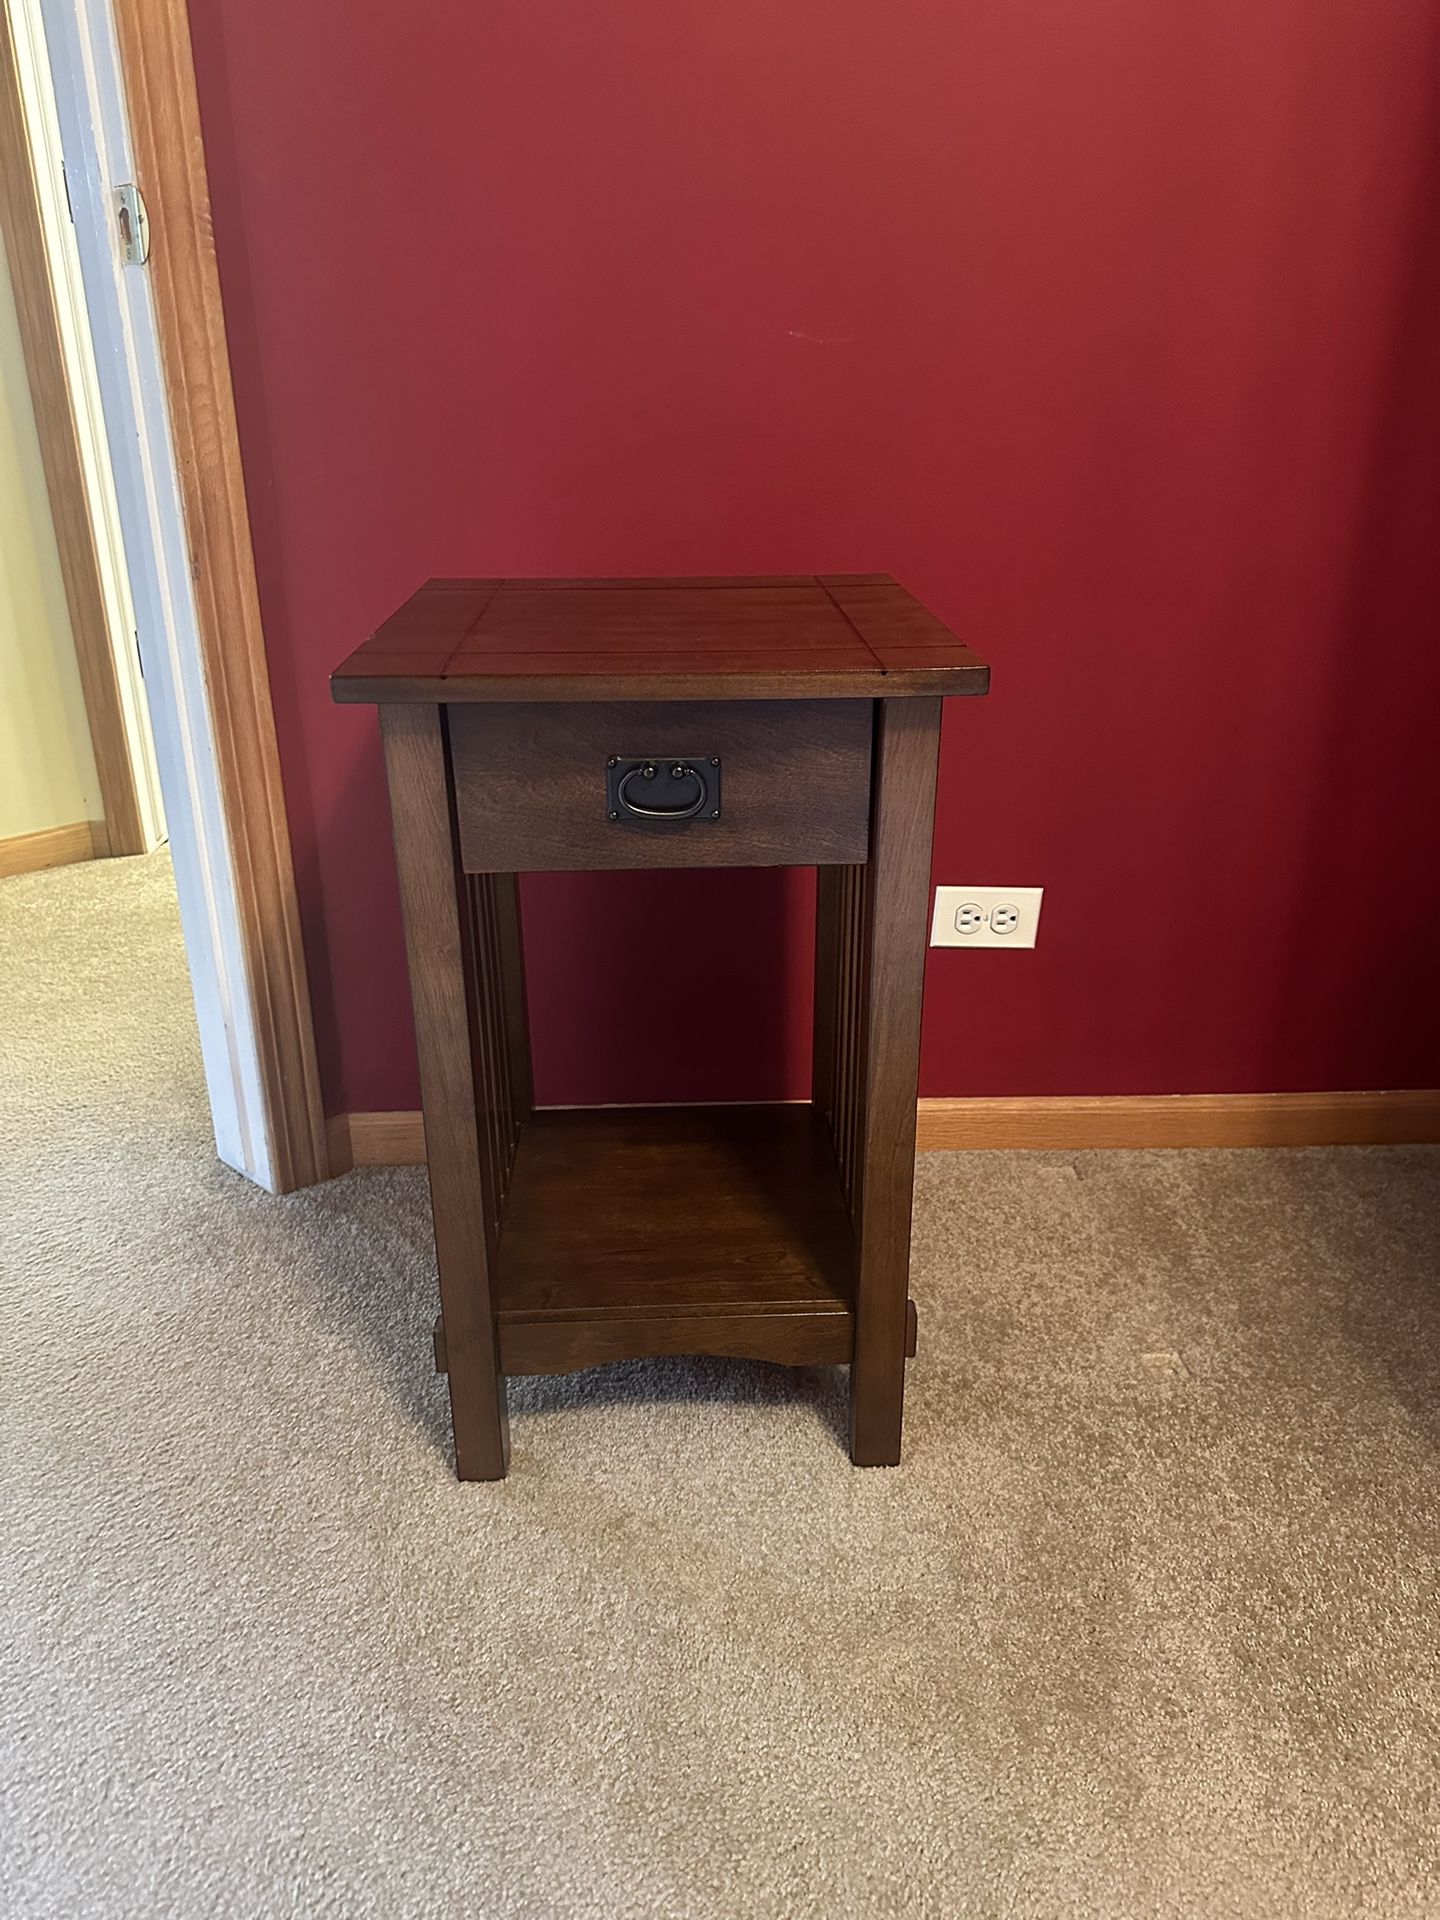 Oakcrest End Table With Storage for Sale